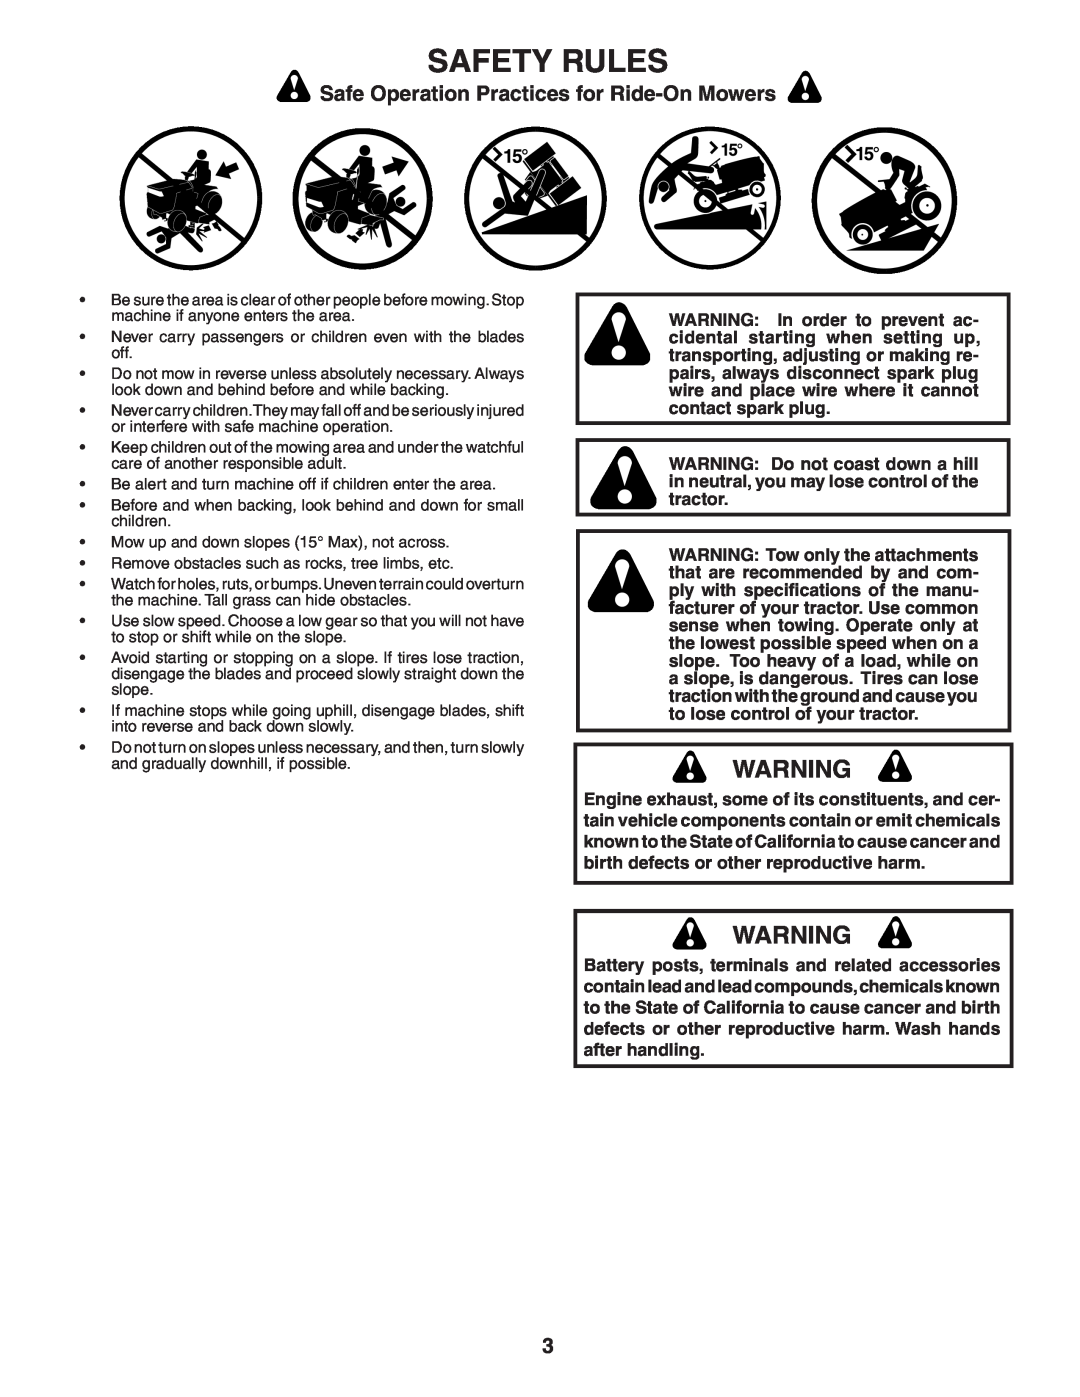 Husqvarna LT1538 owner manual Safe Operation Practices for Ride-On Mowers, Safety Rules 